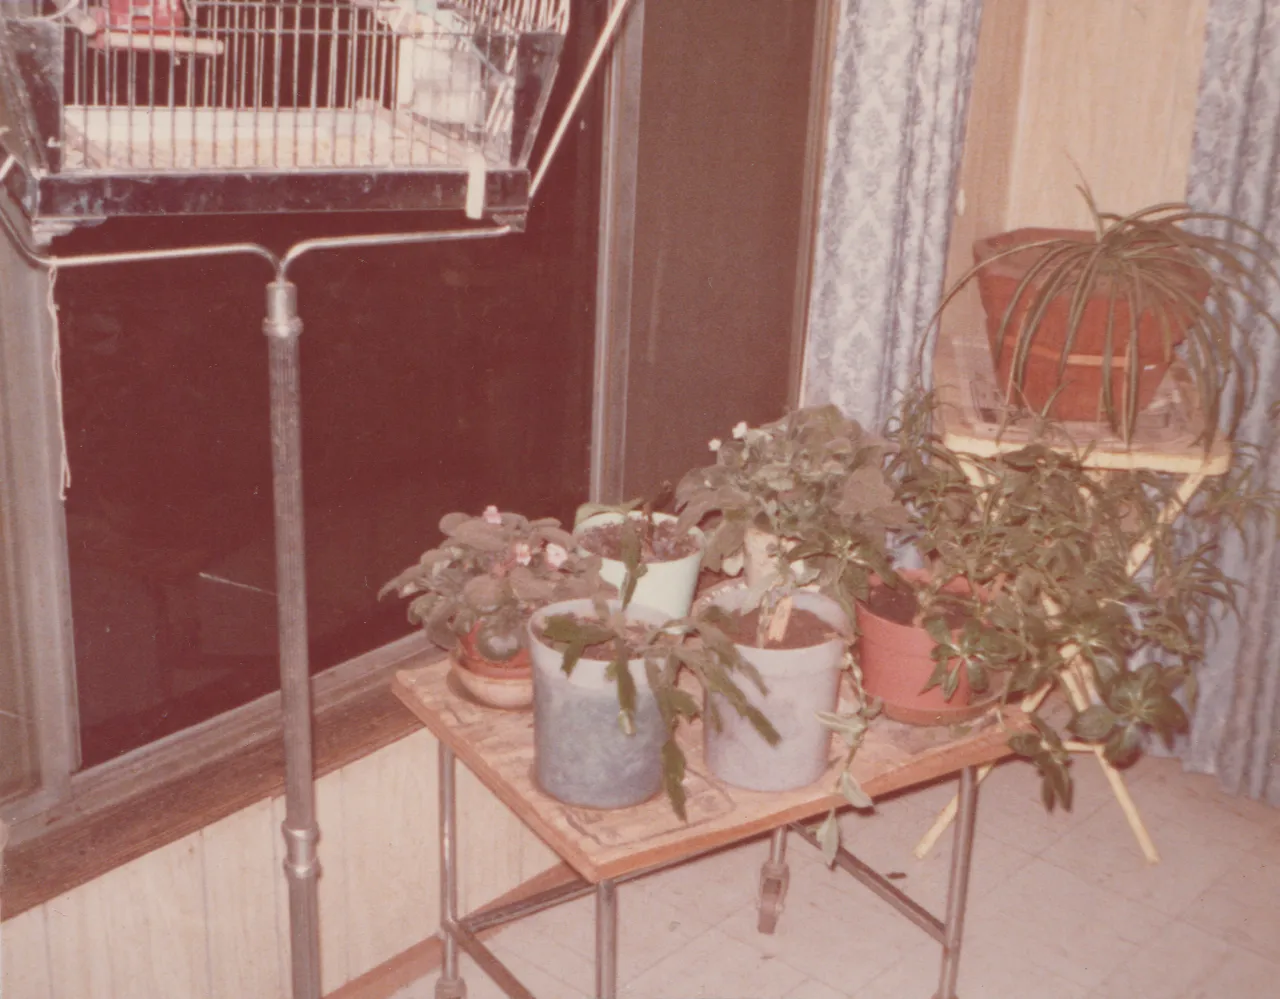 1974-11-28 - Thursday - plants, no date on these 2pics but I guess on or after this date in November of that year, 2pics-1.png